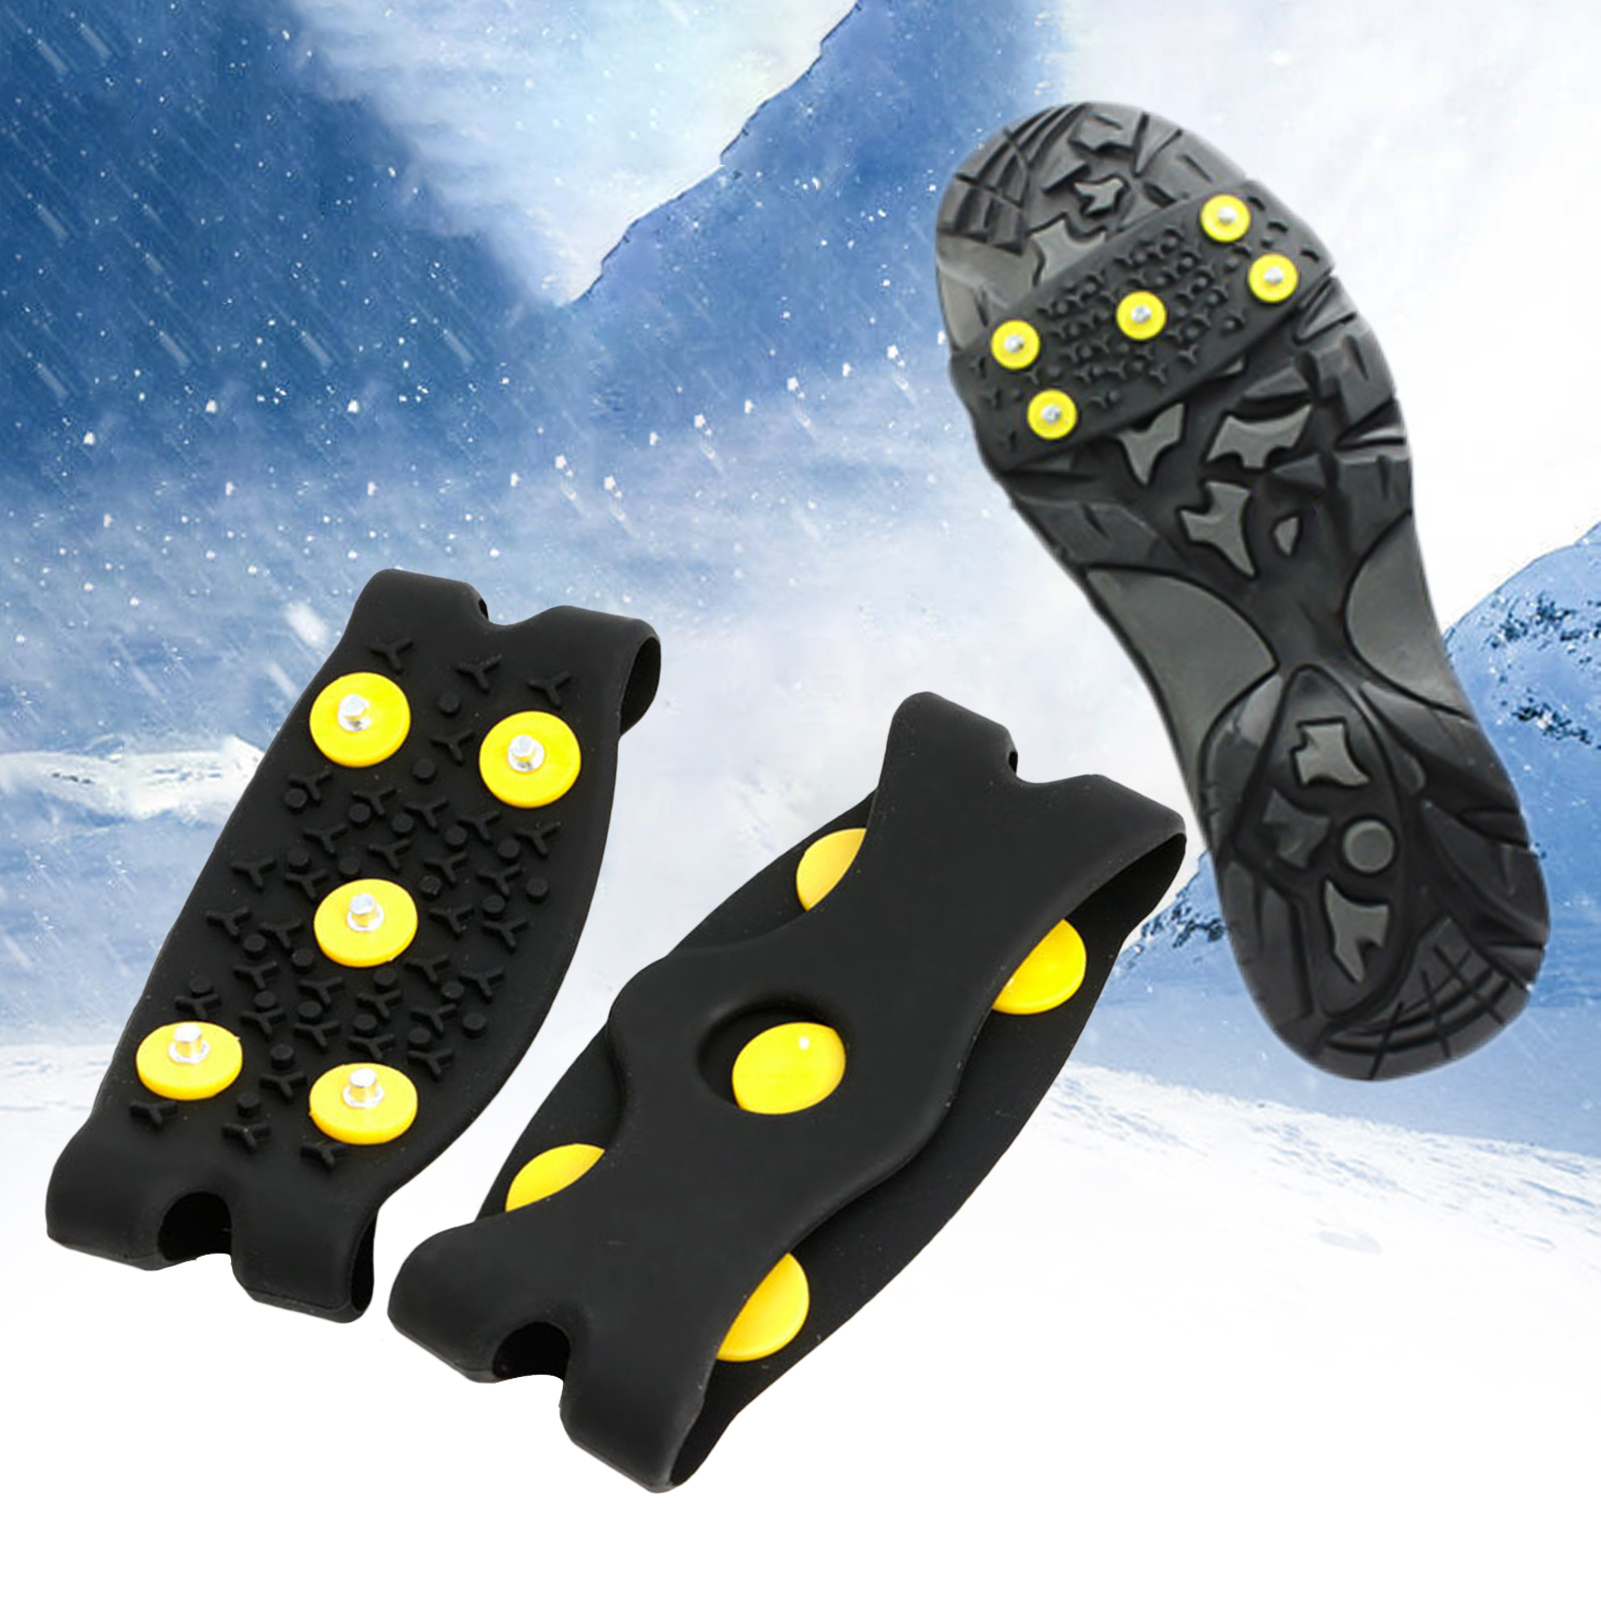 SPRING PARK 1 Pair 5-Stud Shoes Cover Non-Slip Silicone Shoes Cover Crampon Snow Anti Slip Spikes Grips Crampon Cleats Shoes Accessories (Black) - image 1 of 6